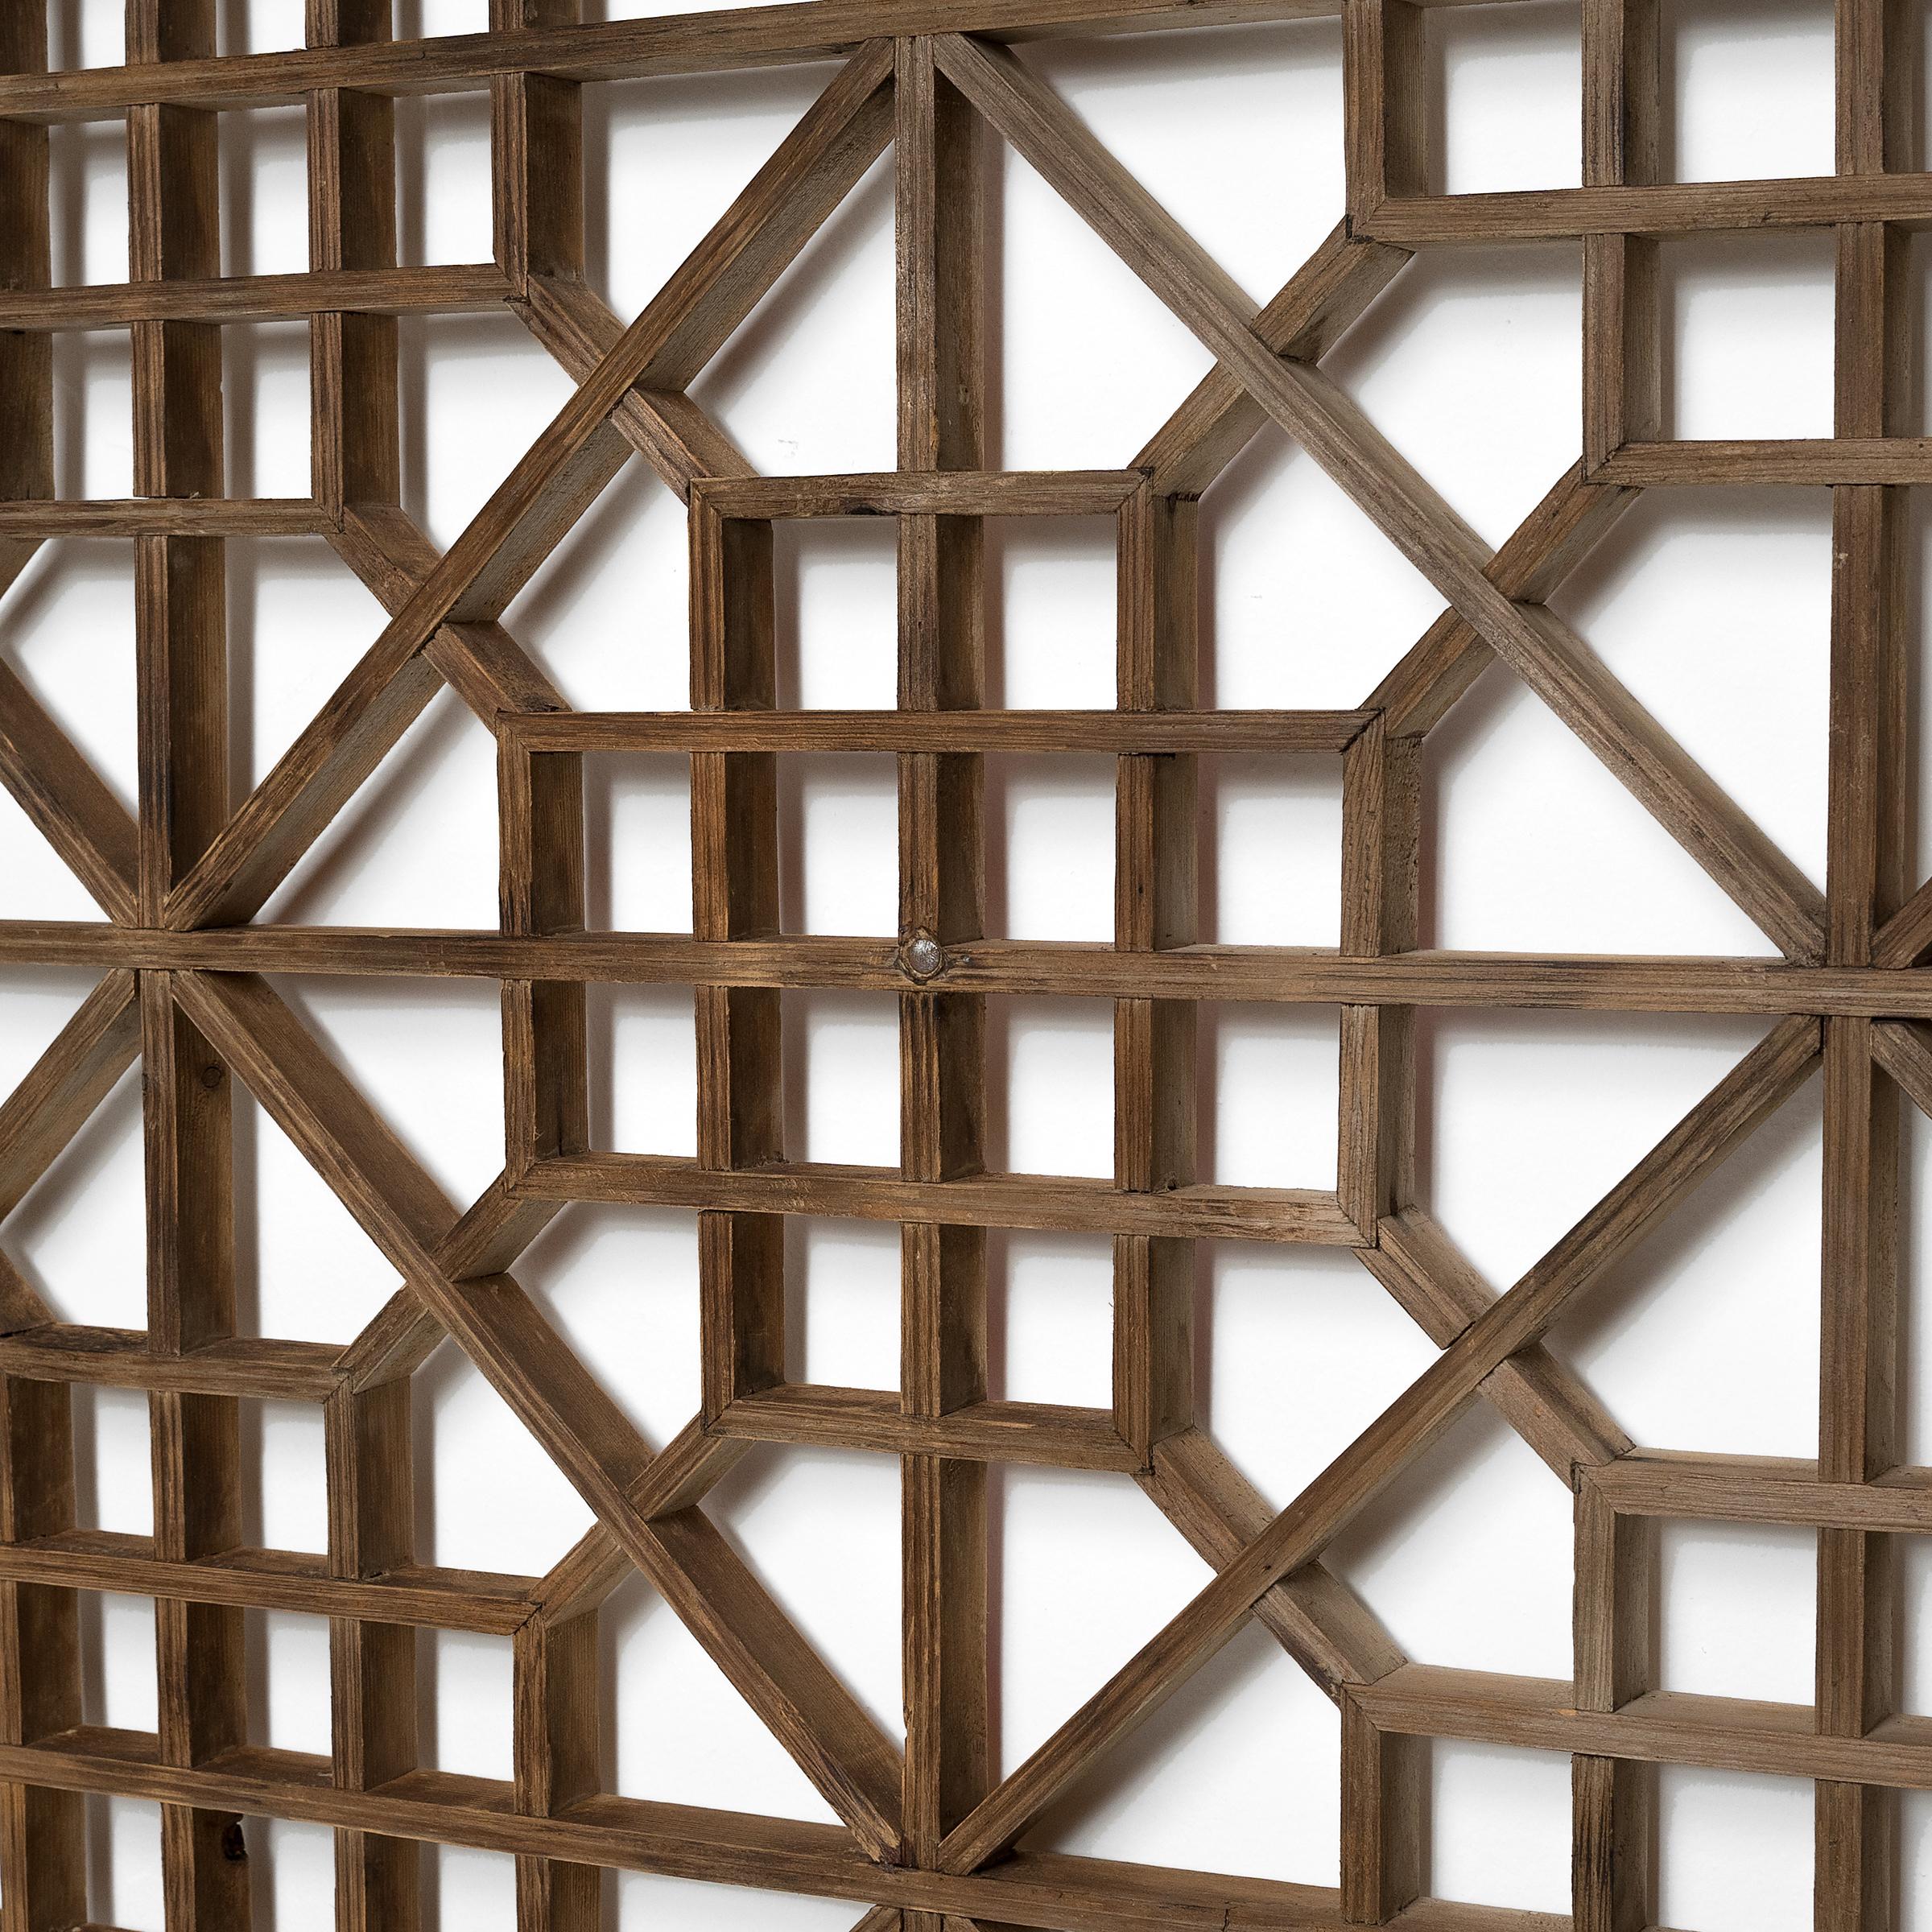 Chinese Shanxi Lattice Window Panel, circa 1900 In Good Condition For Sale In Chicago, IL